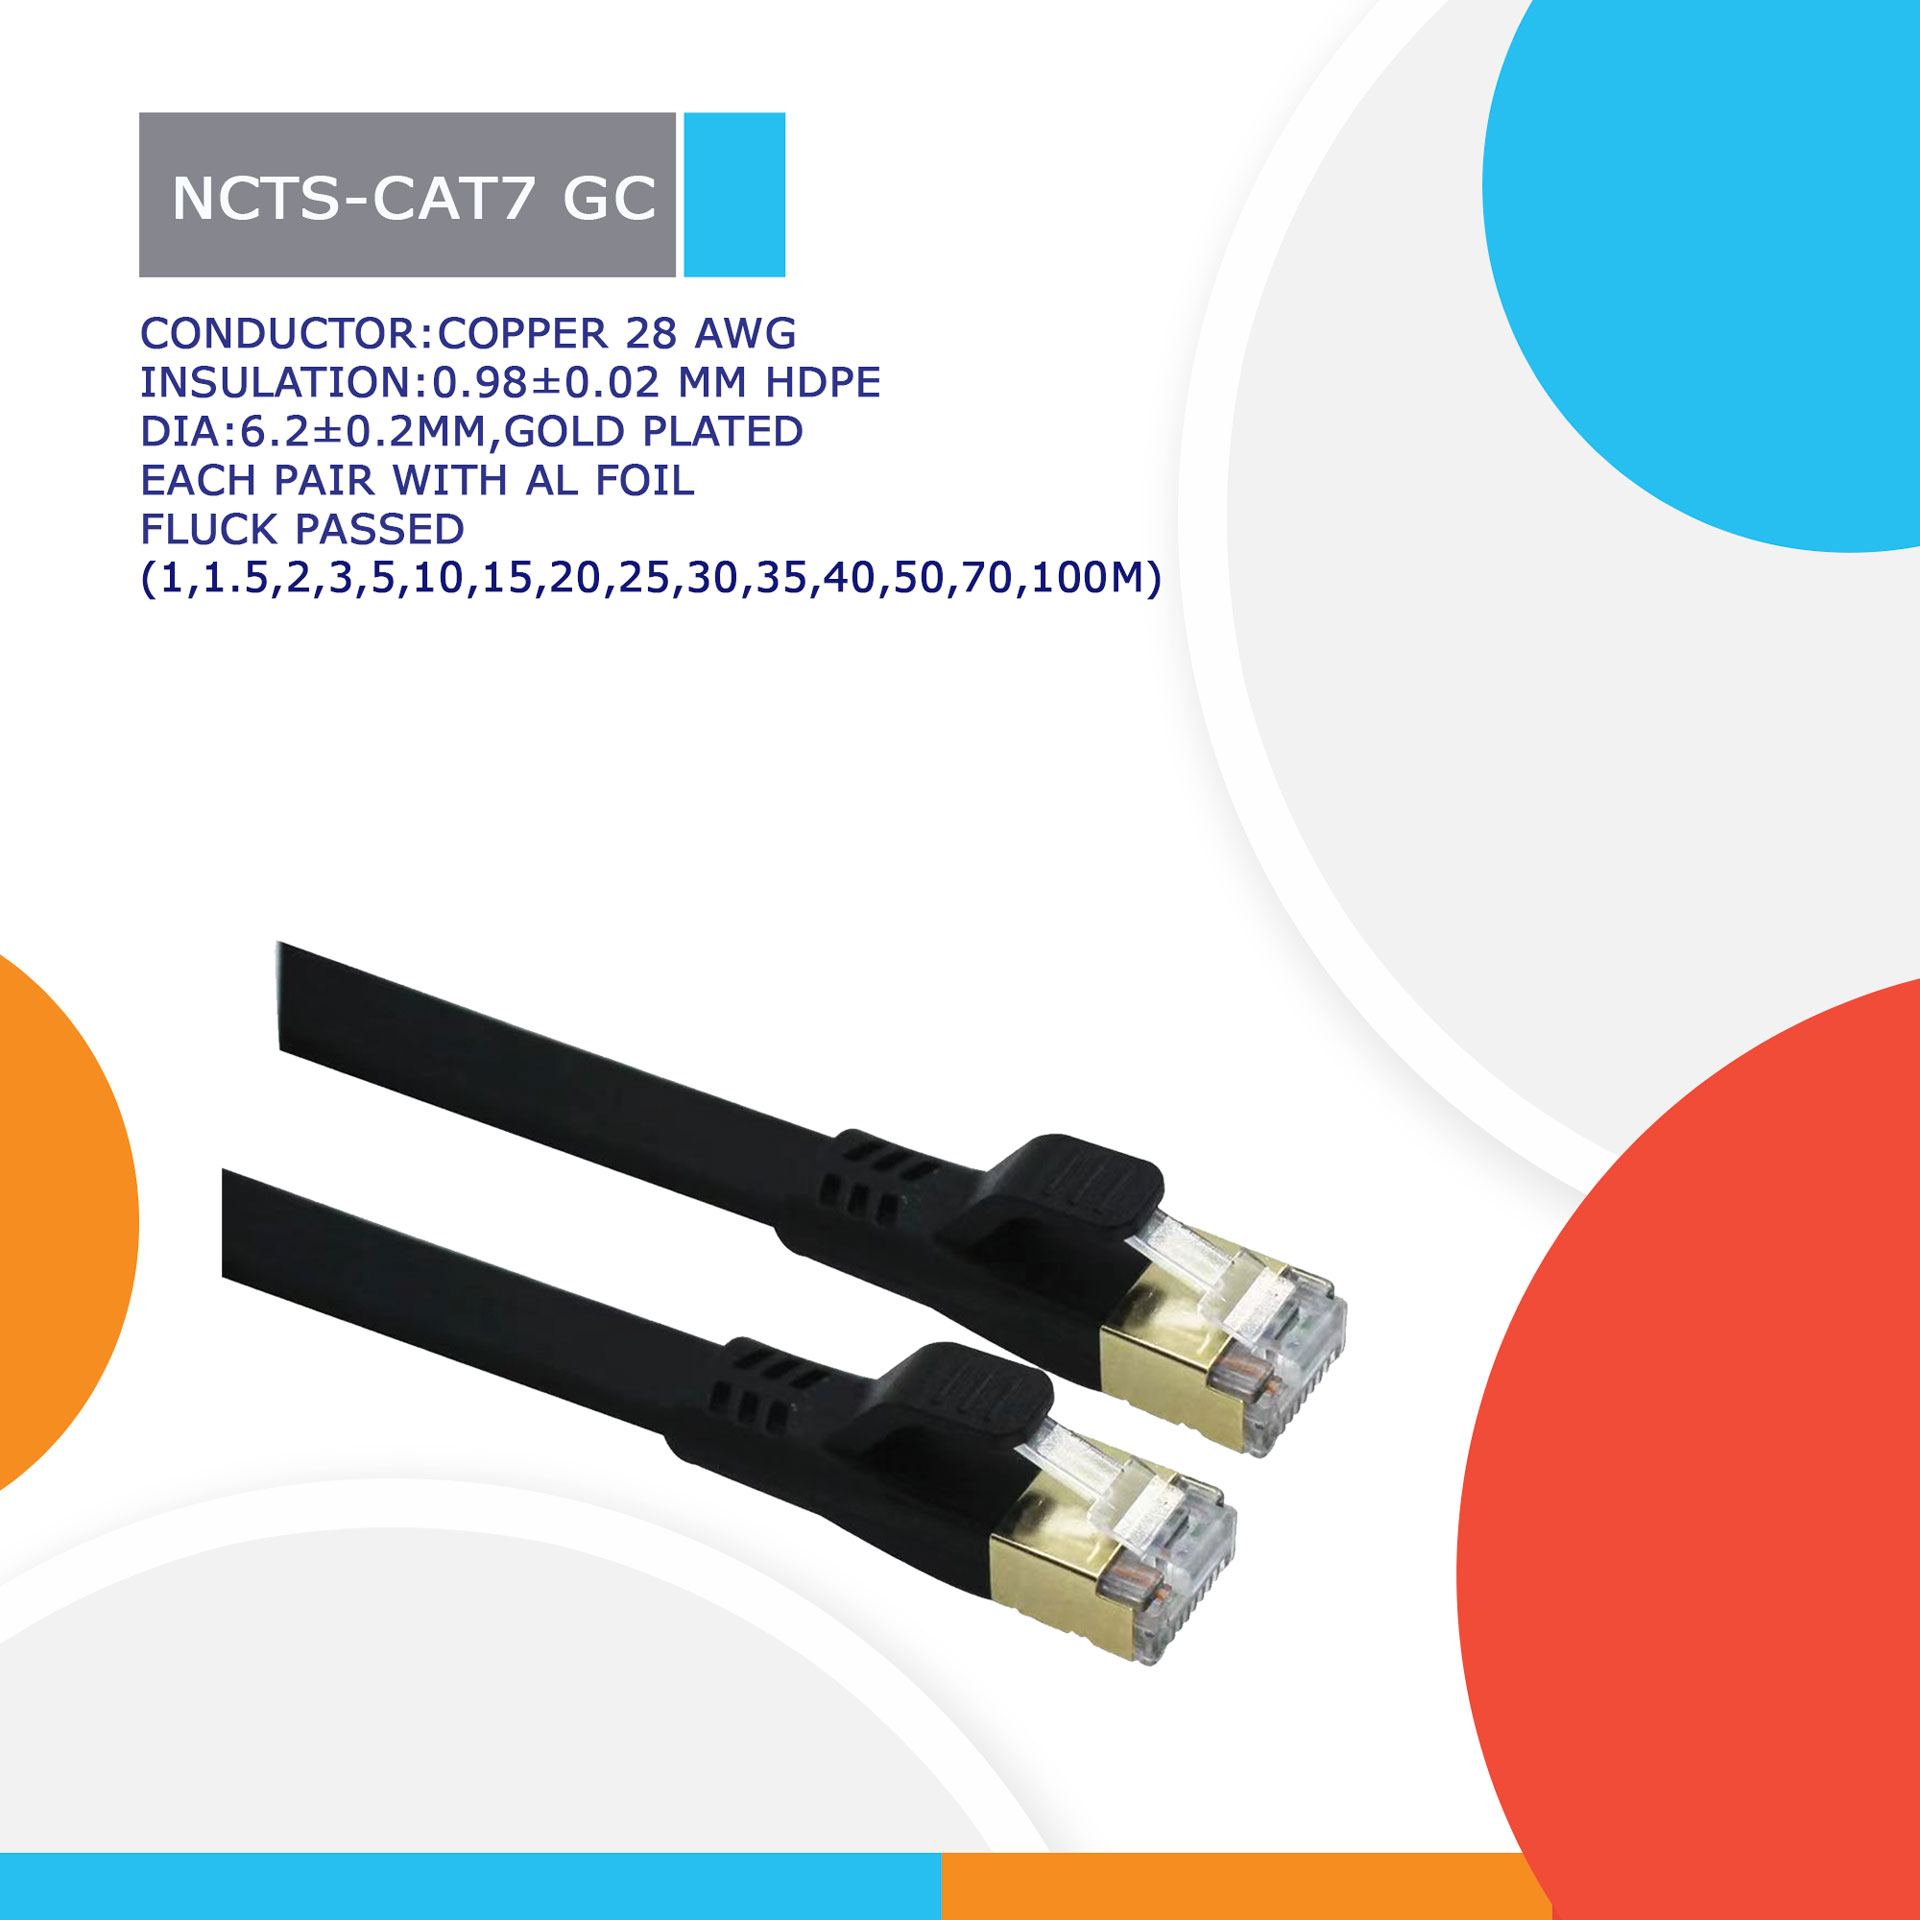 NCTS-CAT7-GC